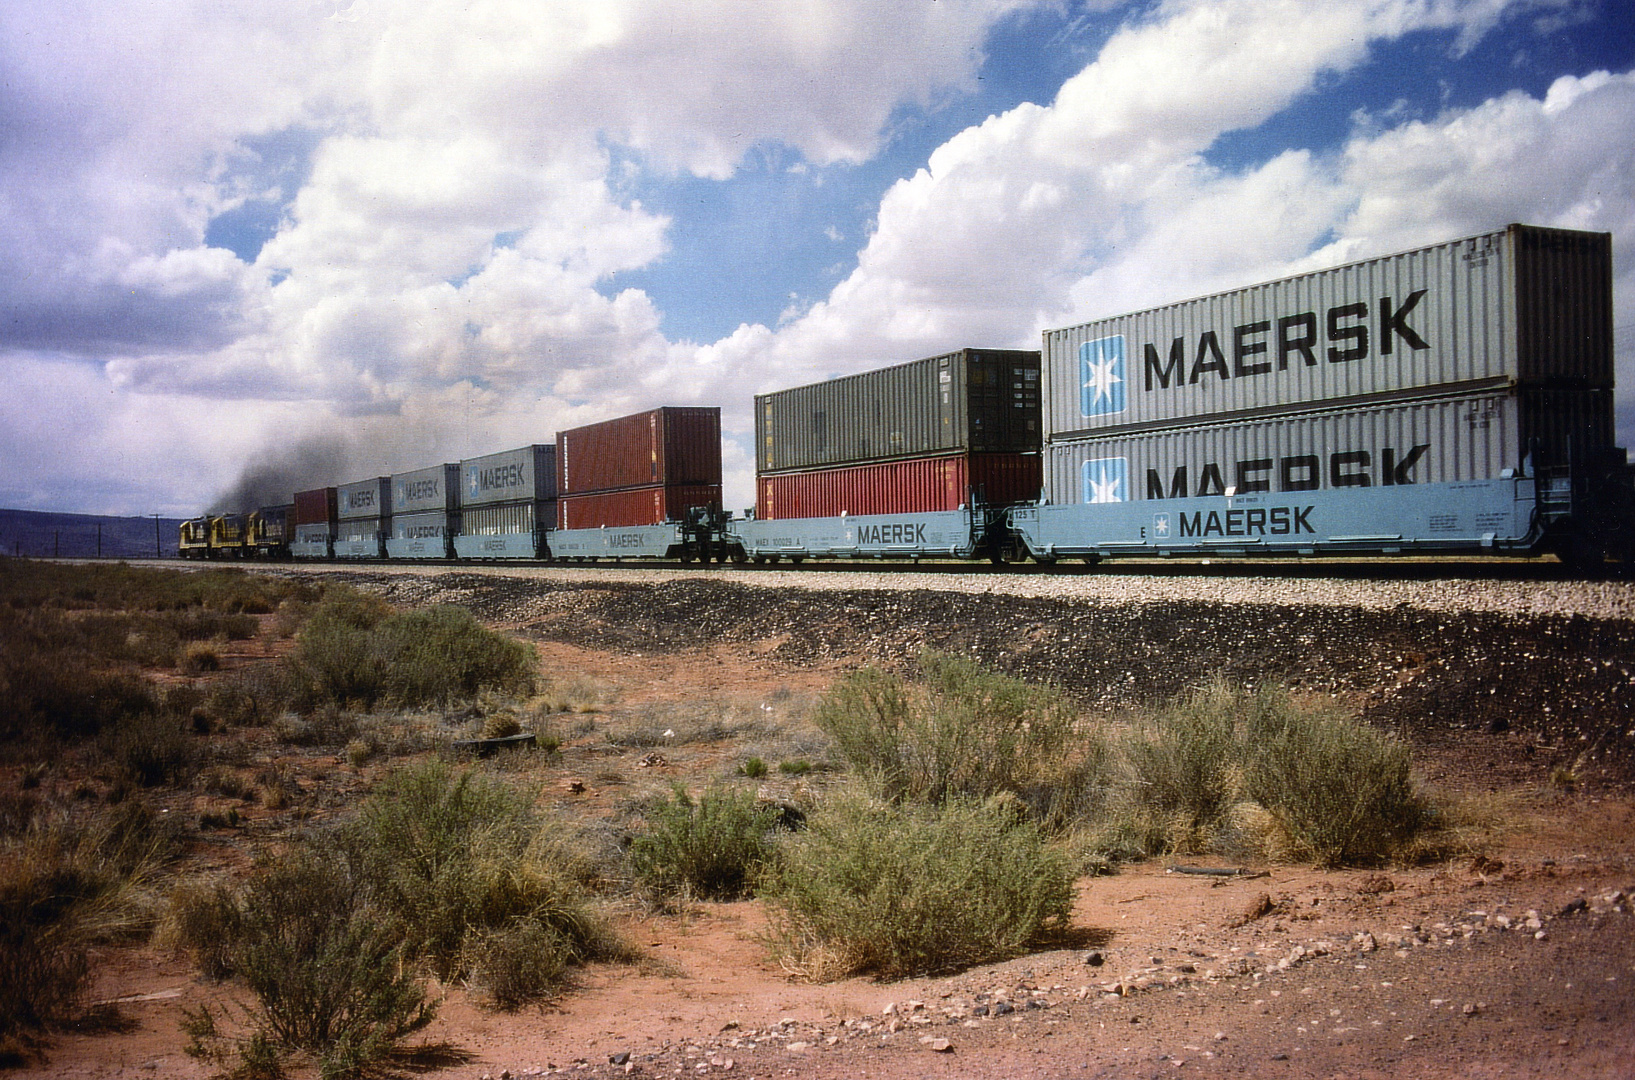 Santa Fe #6376 is leading a Double Stack Container and All purpose Cars withTrailer, Delies,NM